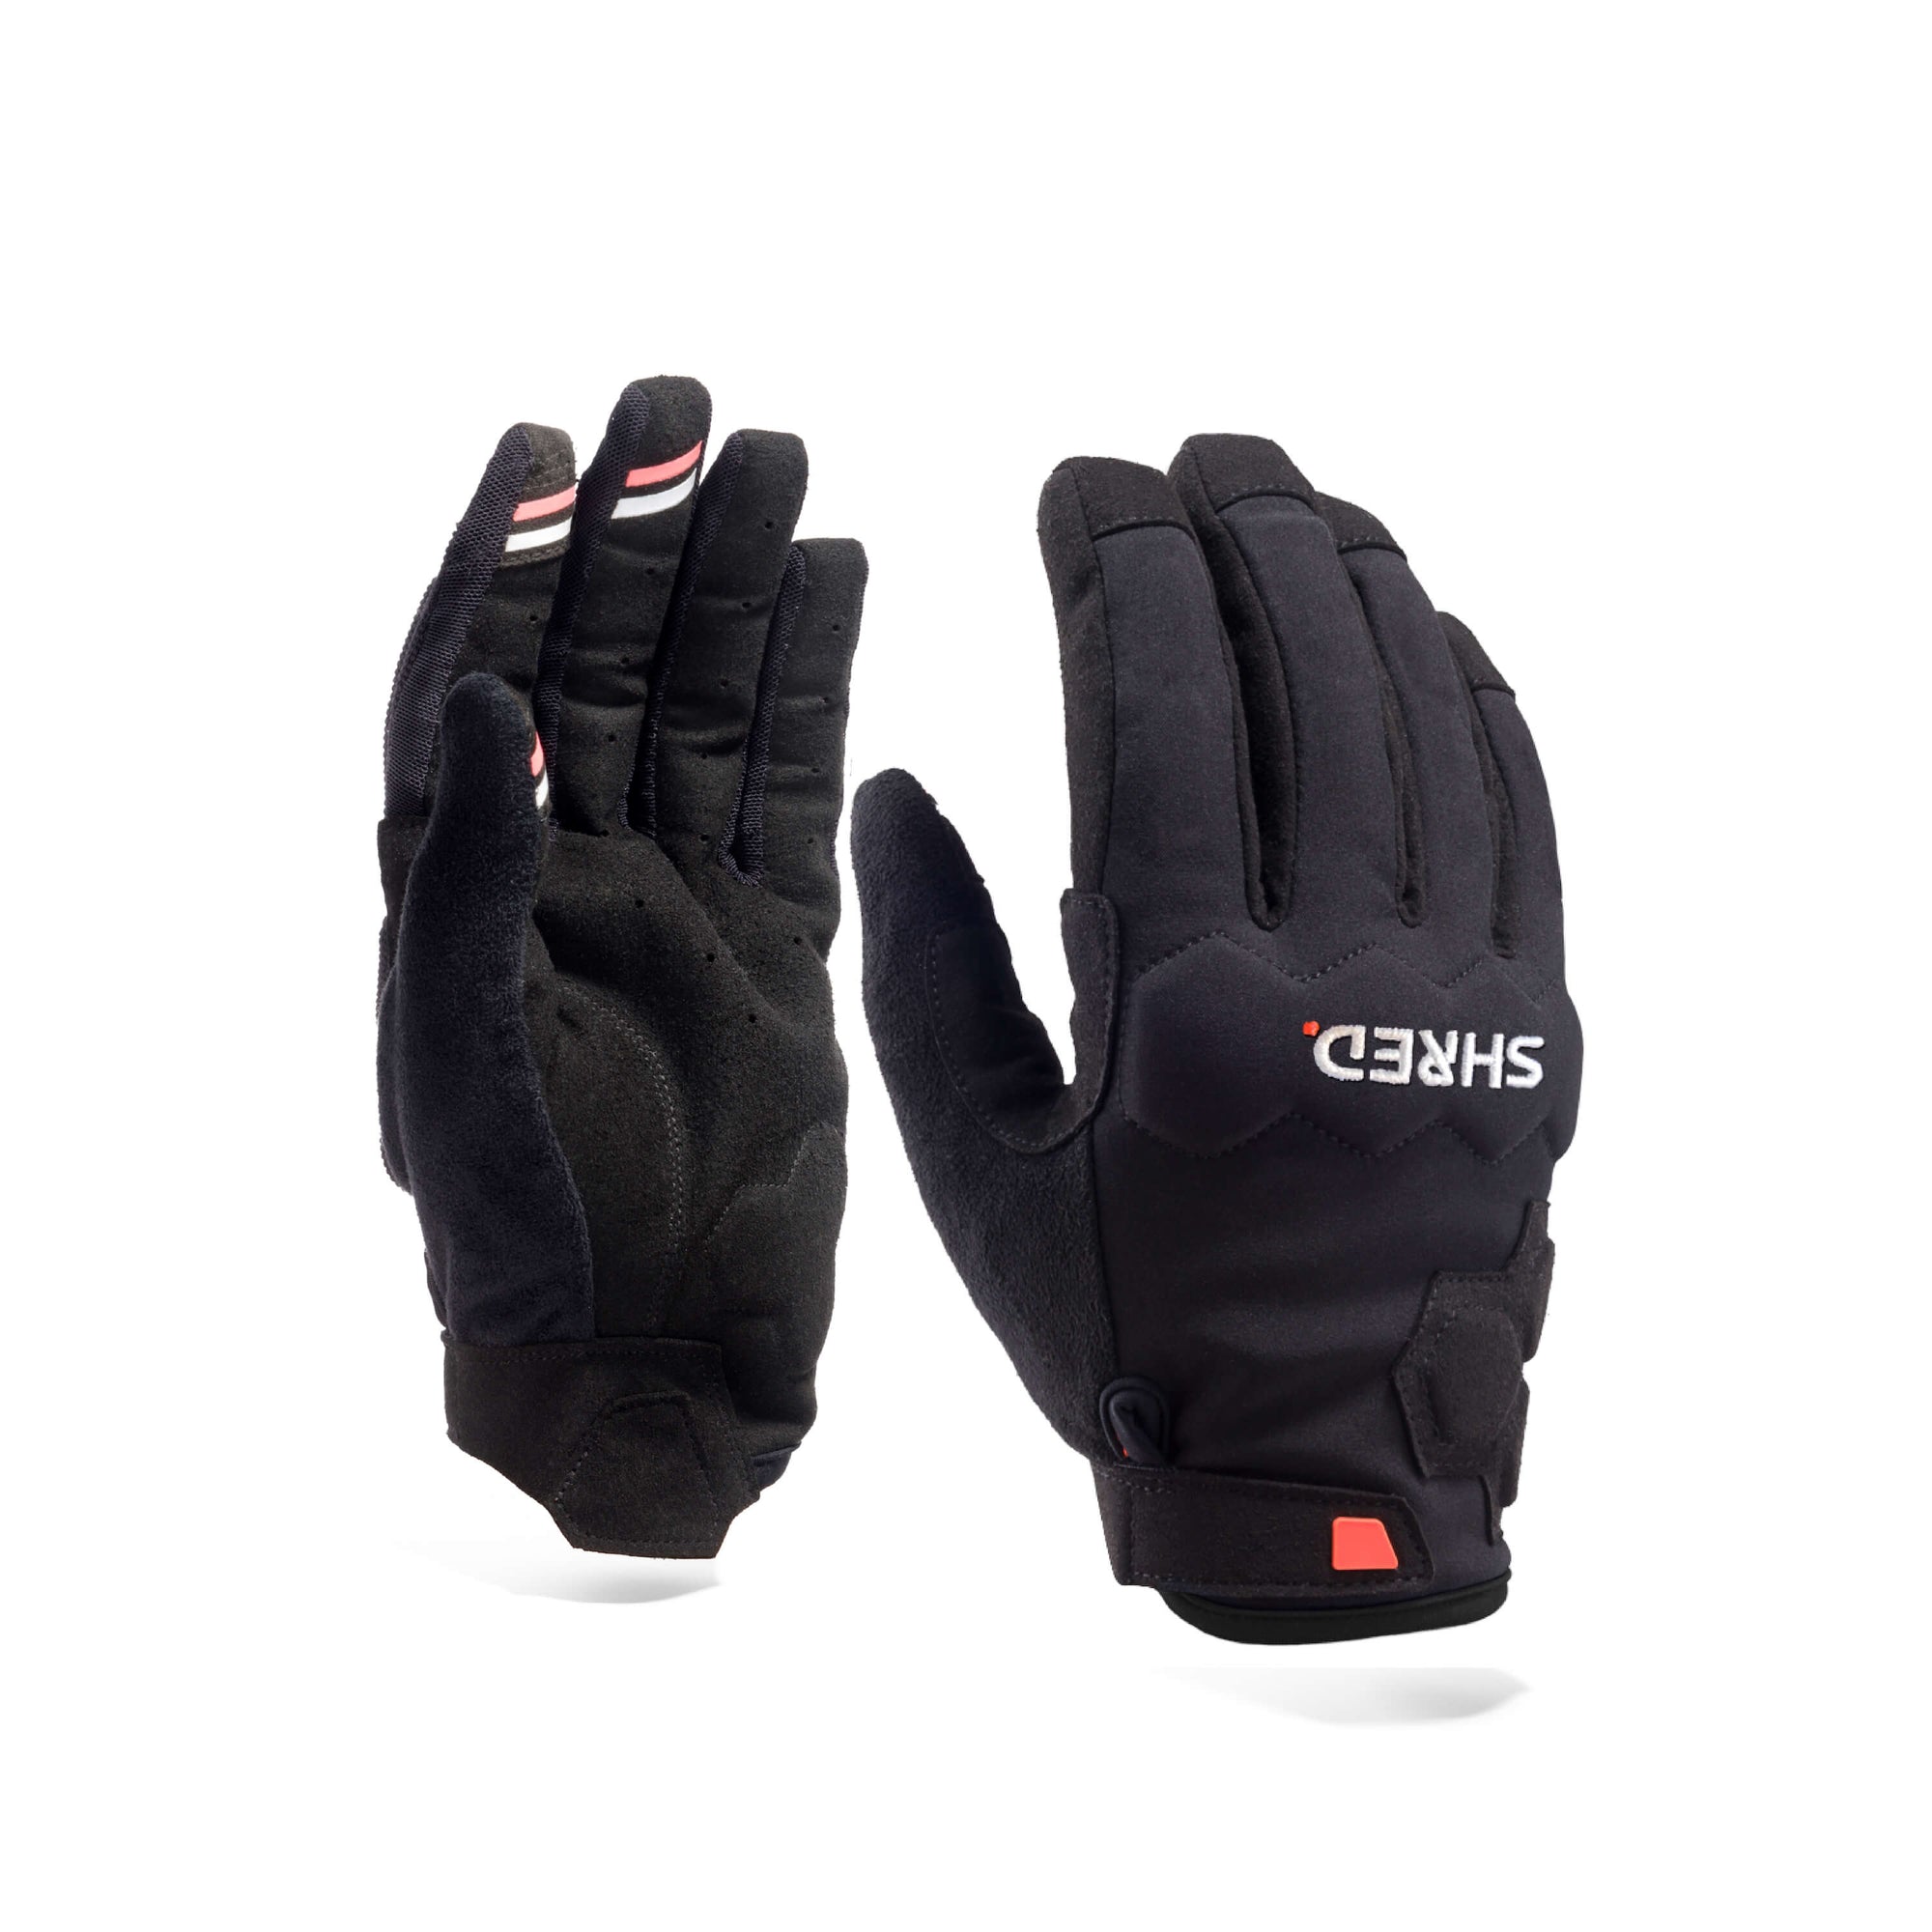 Mtb Protective Gloves Warm - Protective Gloves|BPBGWL11L,BPBGWL11M,BPBGWL11S,BPBGWL11XL,BPBGWL11XS